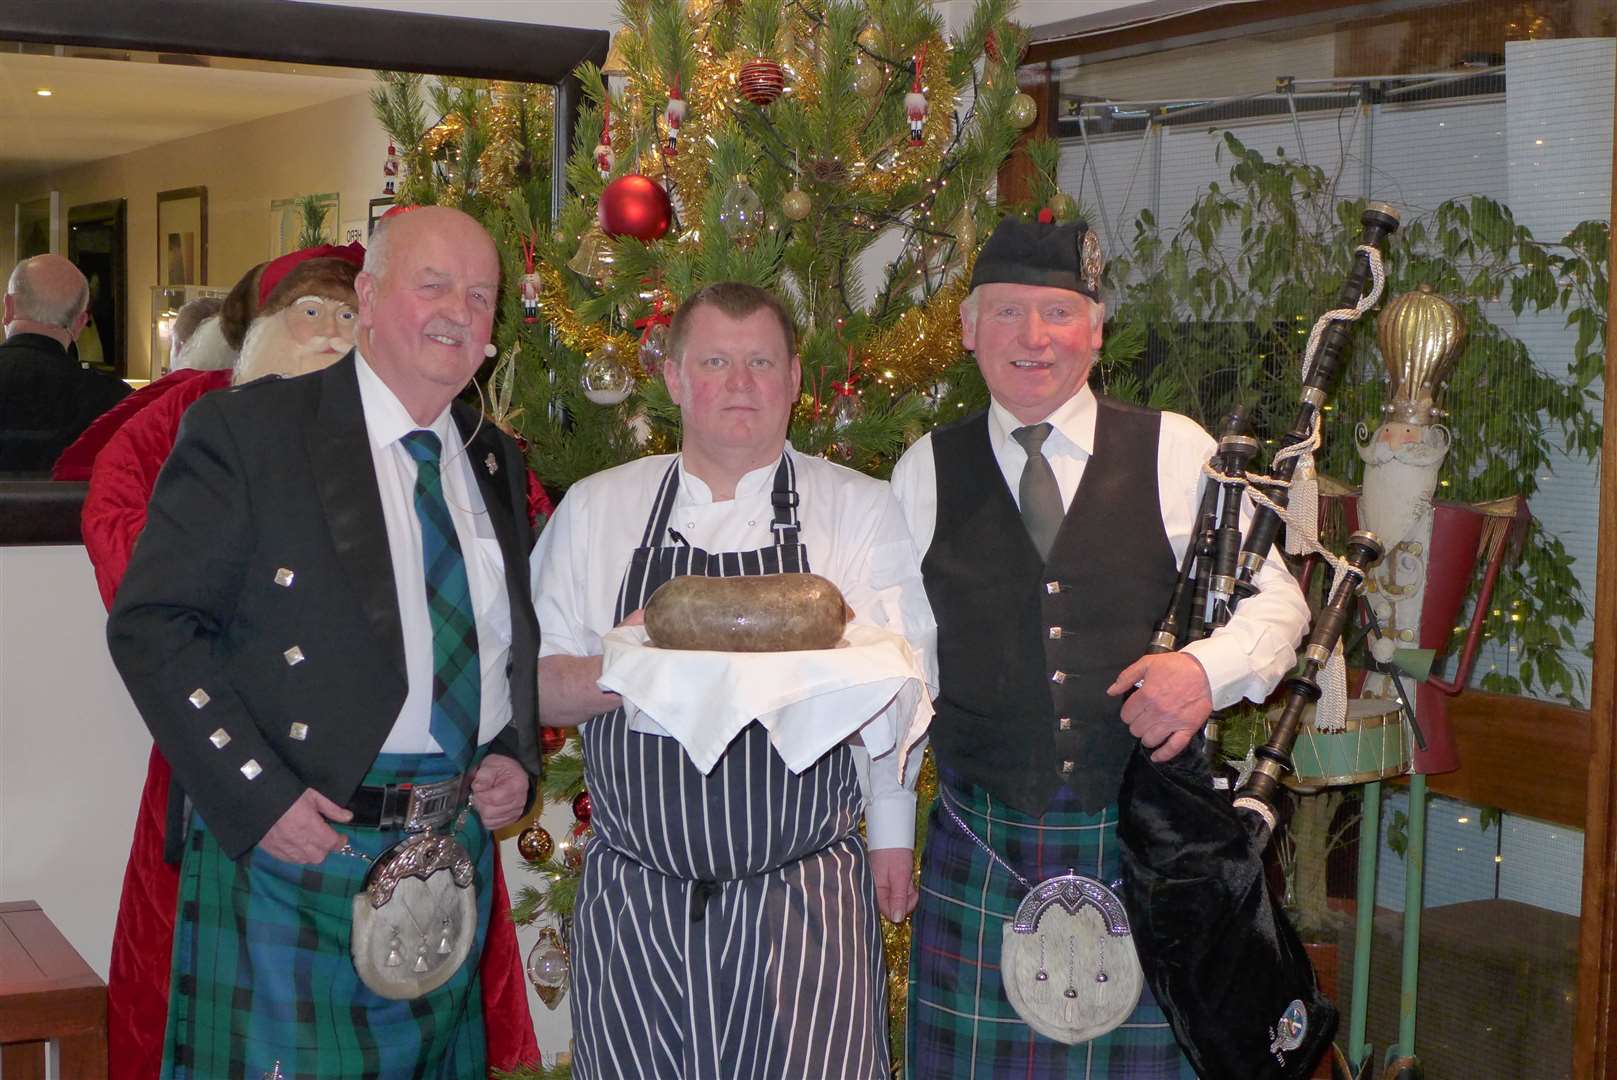 Willie Mackay, chef Andrew Munro, and piper Alistair Miller before going into the anniversary dinner at the Norseman Hotel.